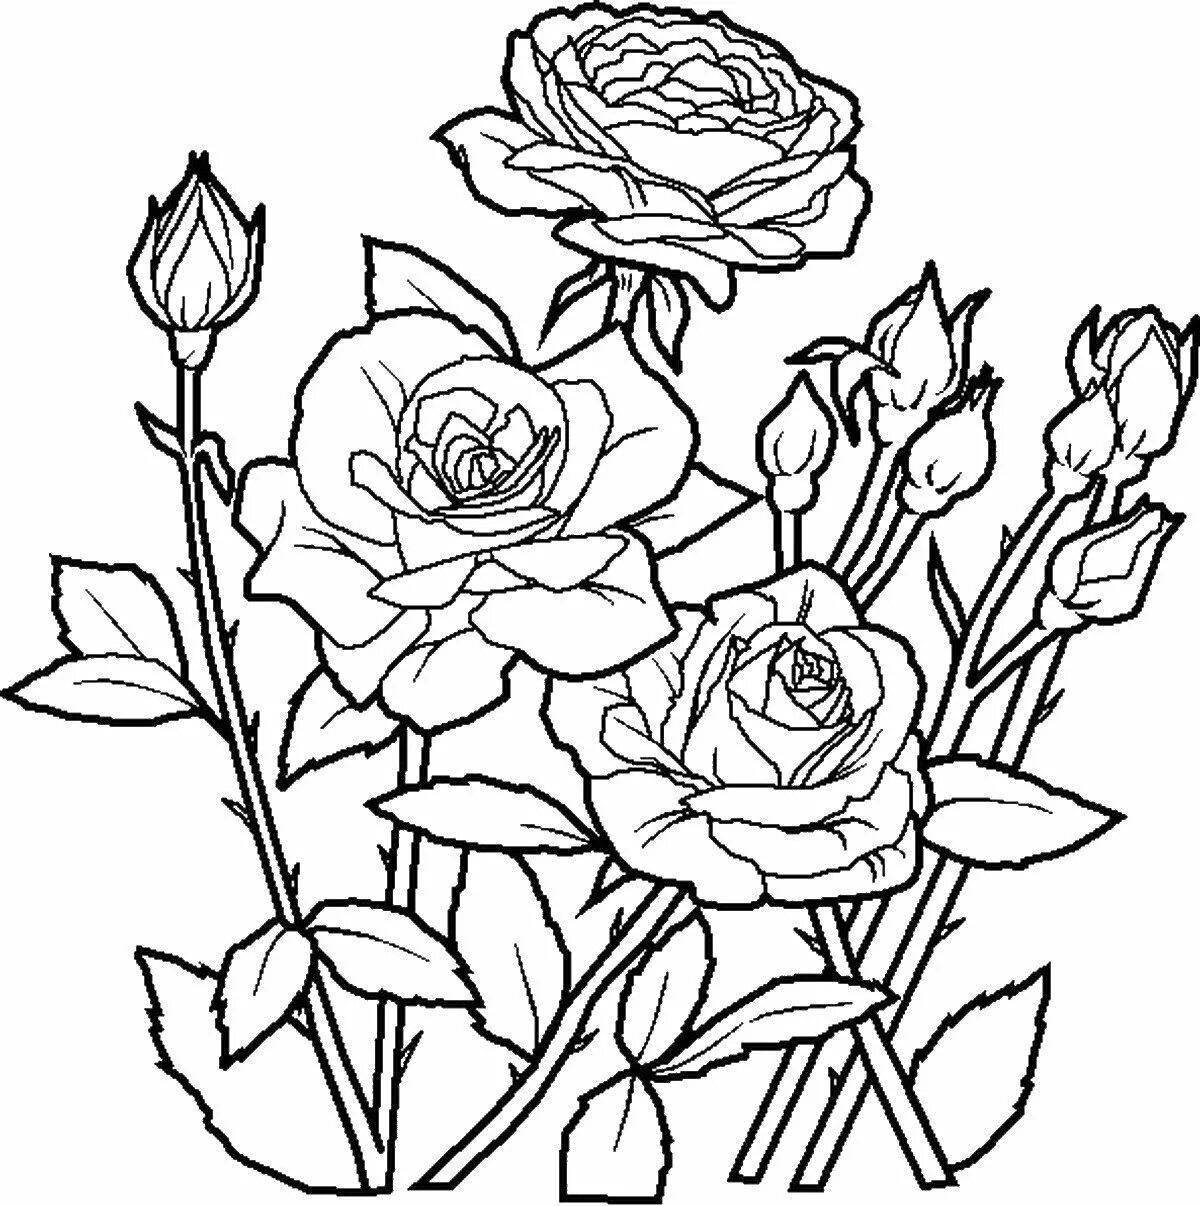 Exquisite rose coloring book for 5-6 year olds